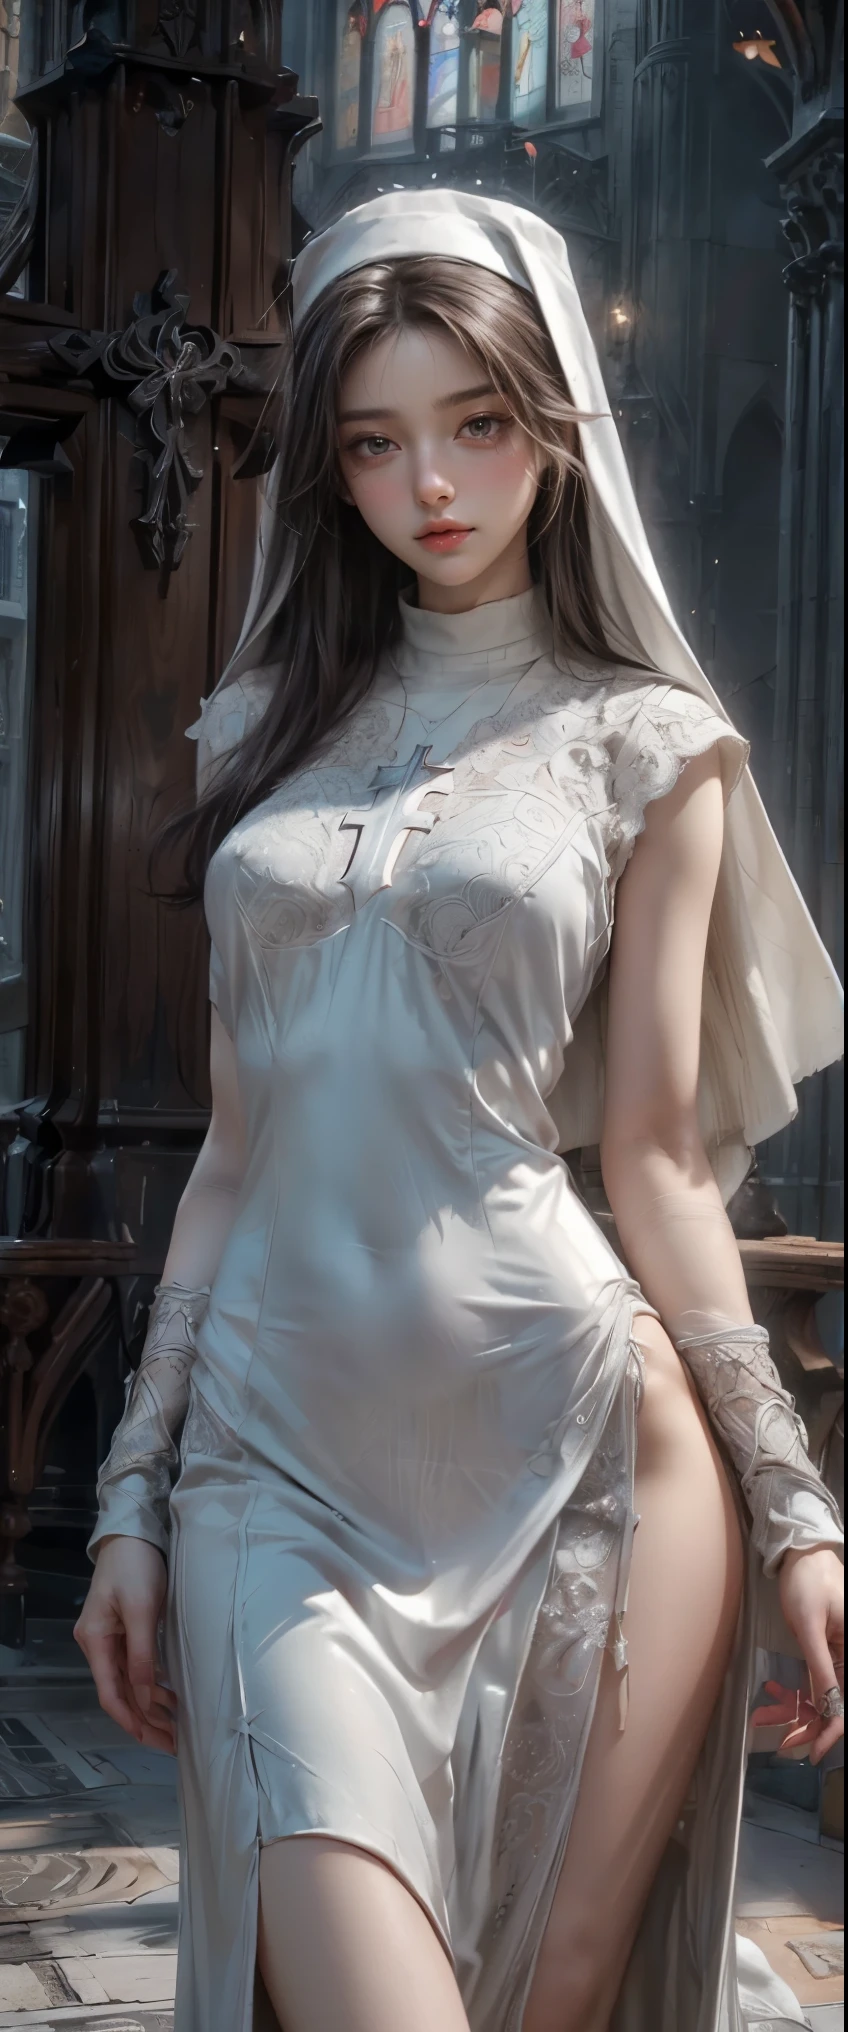 ((masterpiece, highest quality, Highest image quality, High resolution, photorealistic, Raw photo, 8K)), ((Extremely detailed CG unified 8k wallpaper)), (huge stunning goddess shot, very hot and sexy, jaw-dropping beauty, perfect proportions, beautiful body, slim body beauty:1.4), Medieval church, brick walls, young nun crying for the camera, ((nun, wearing white nun's outfit, no skin showing, Cross, intricate detailing:1.3)), white saint, 